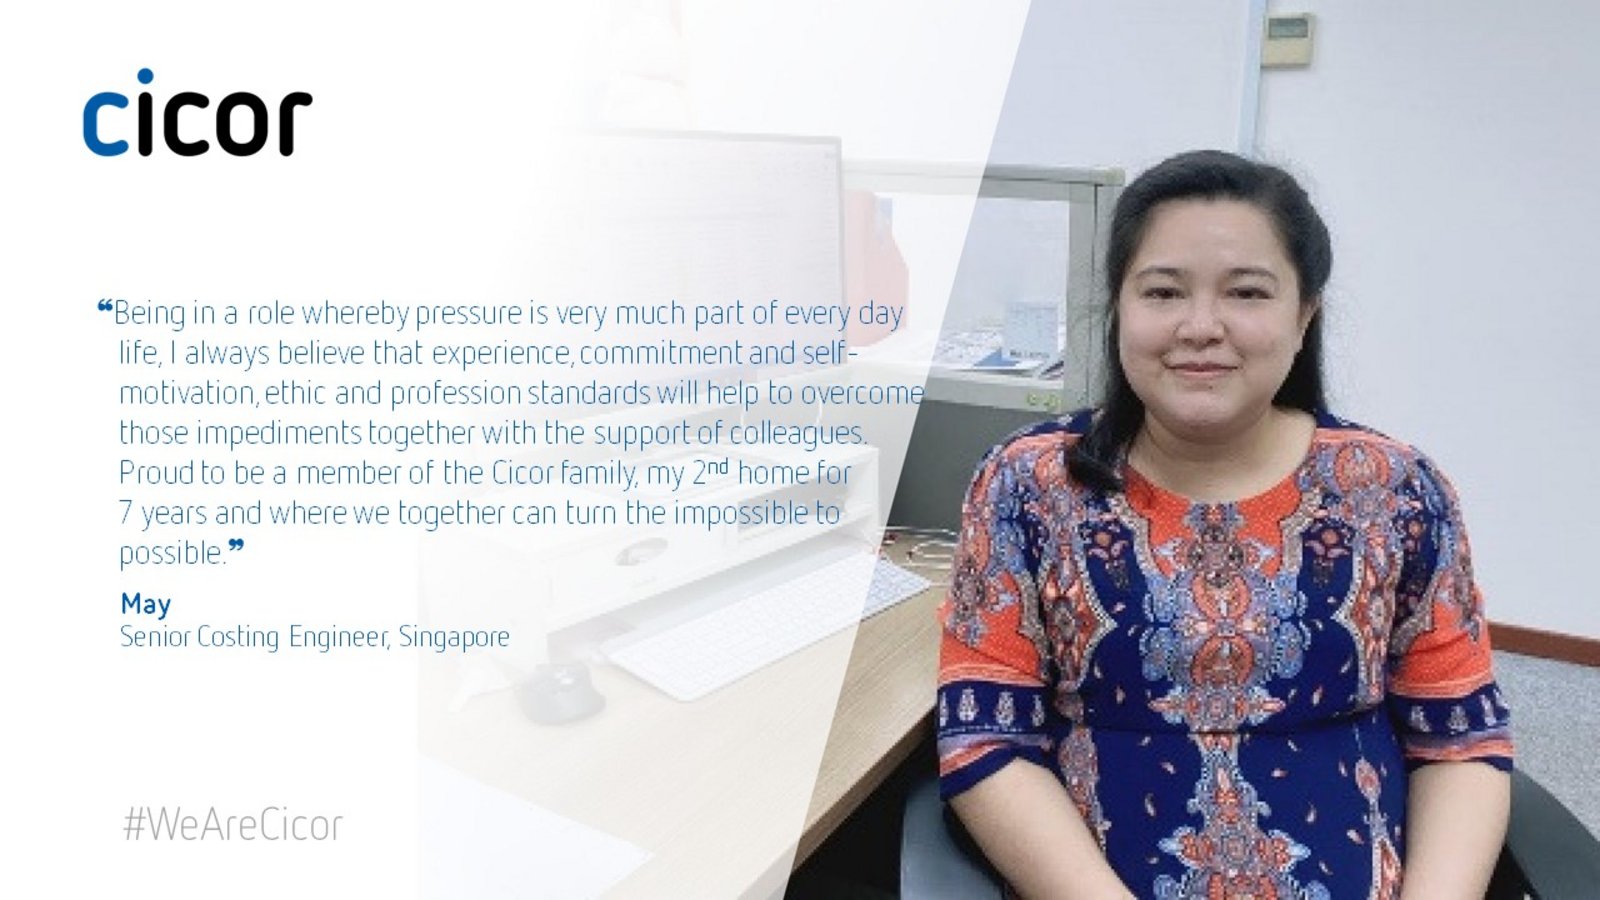 Testimonial of May who works at the Cicor site in Singapore